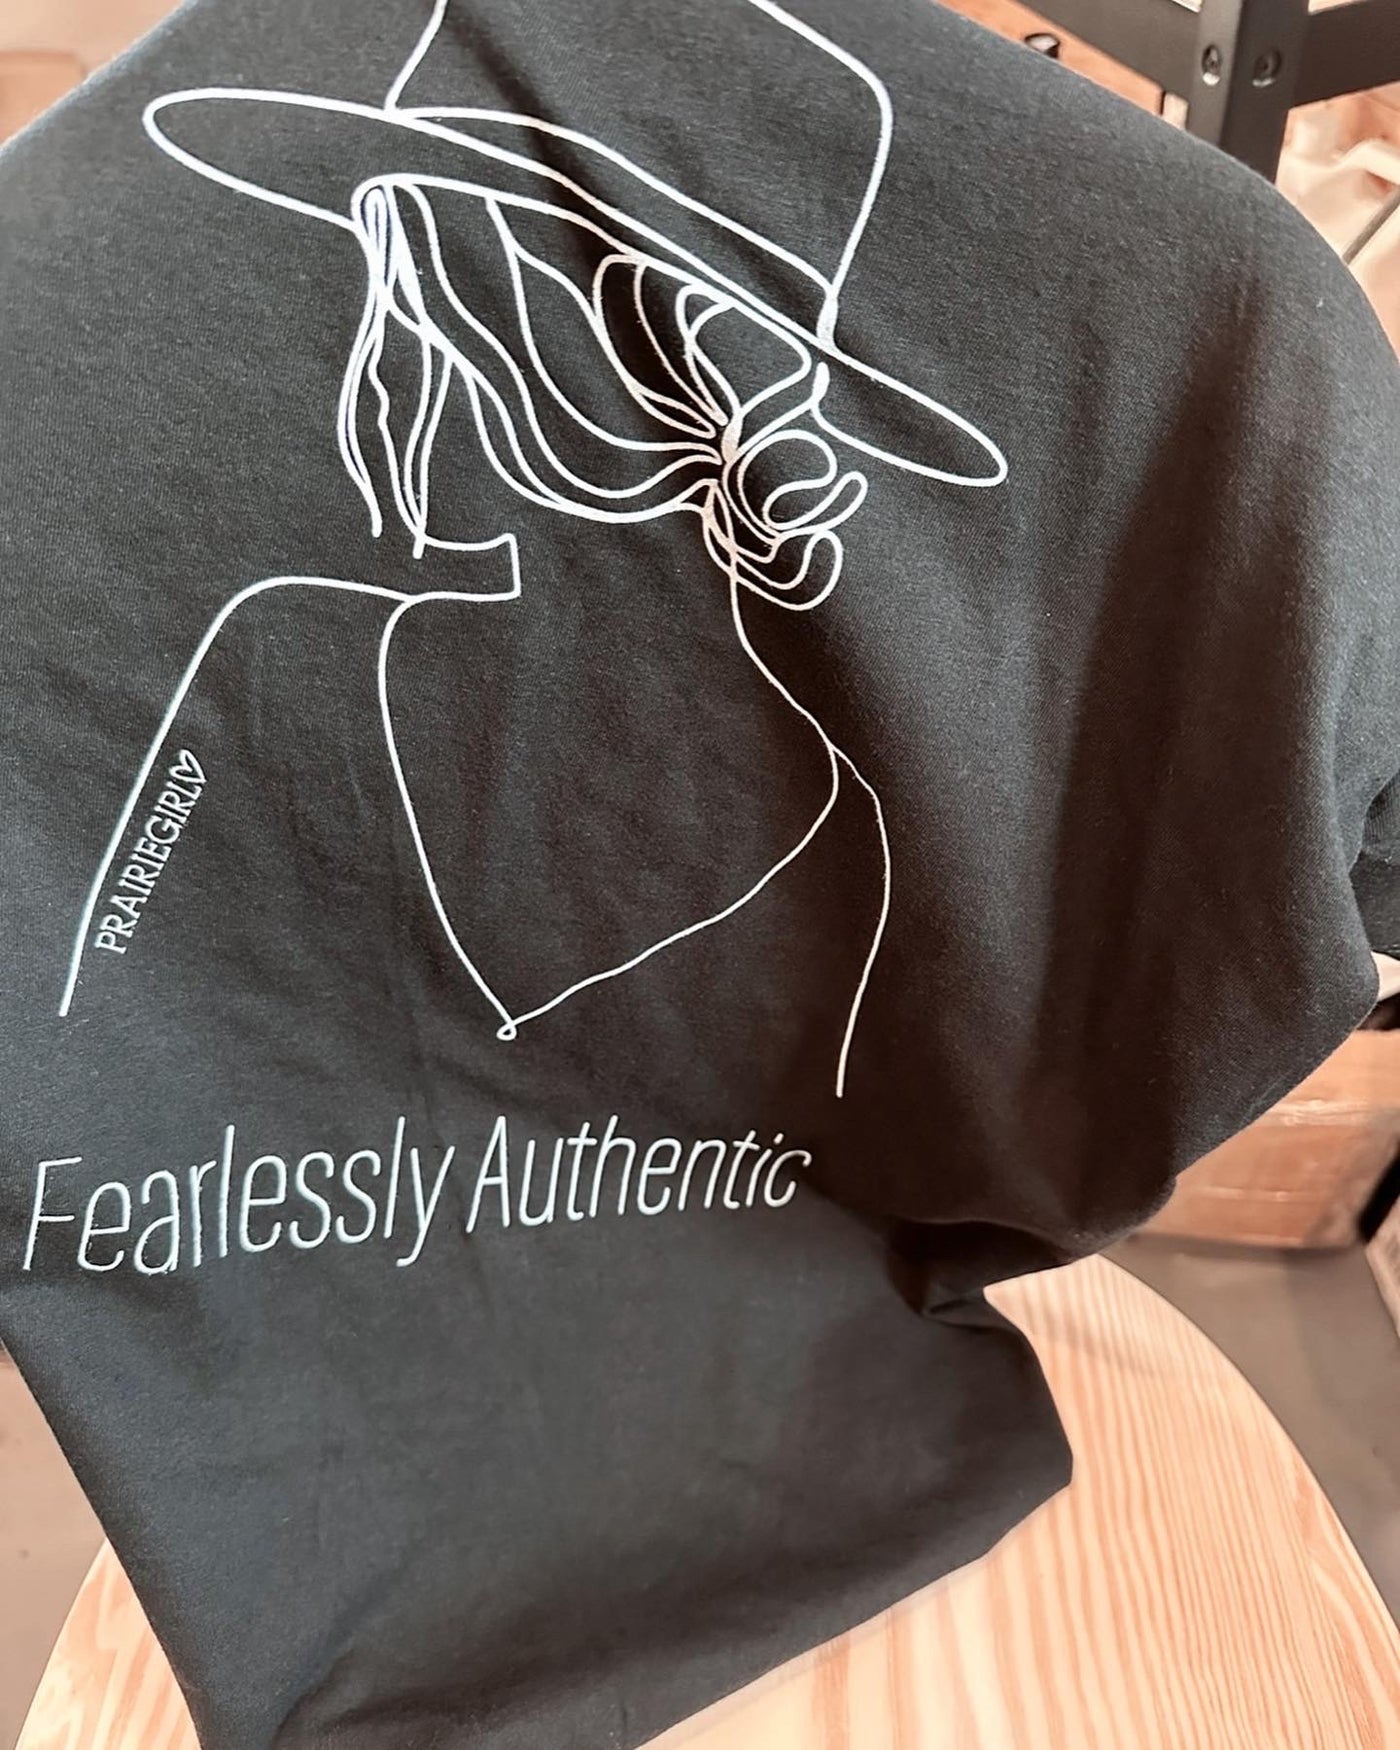 Fearlessly Authentic graphic t